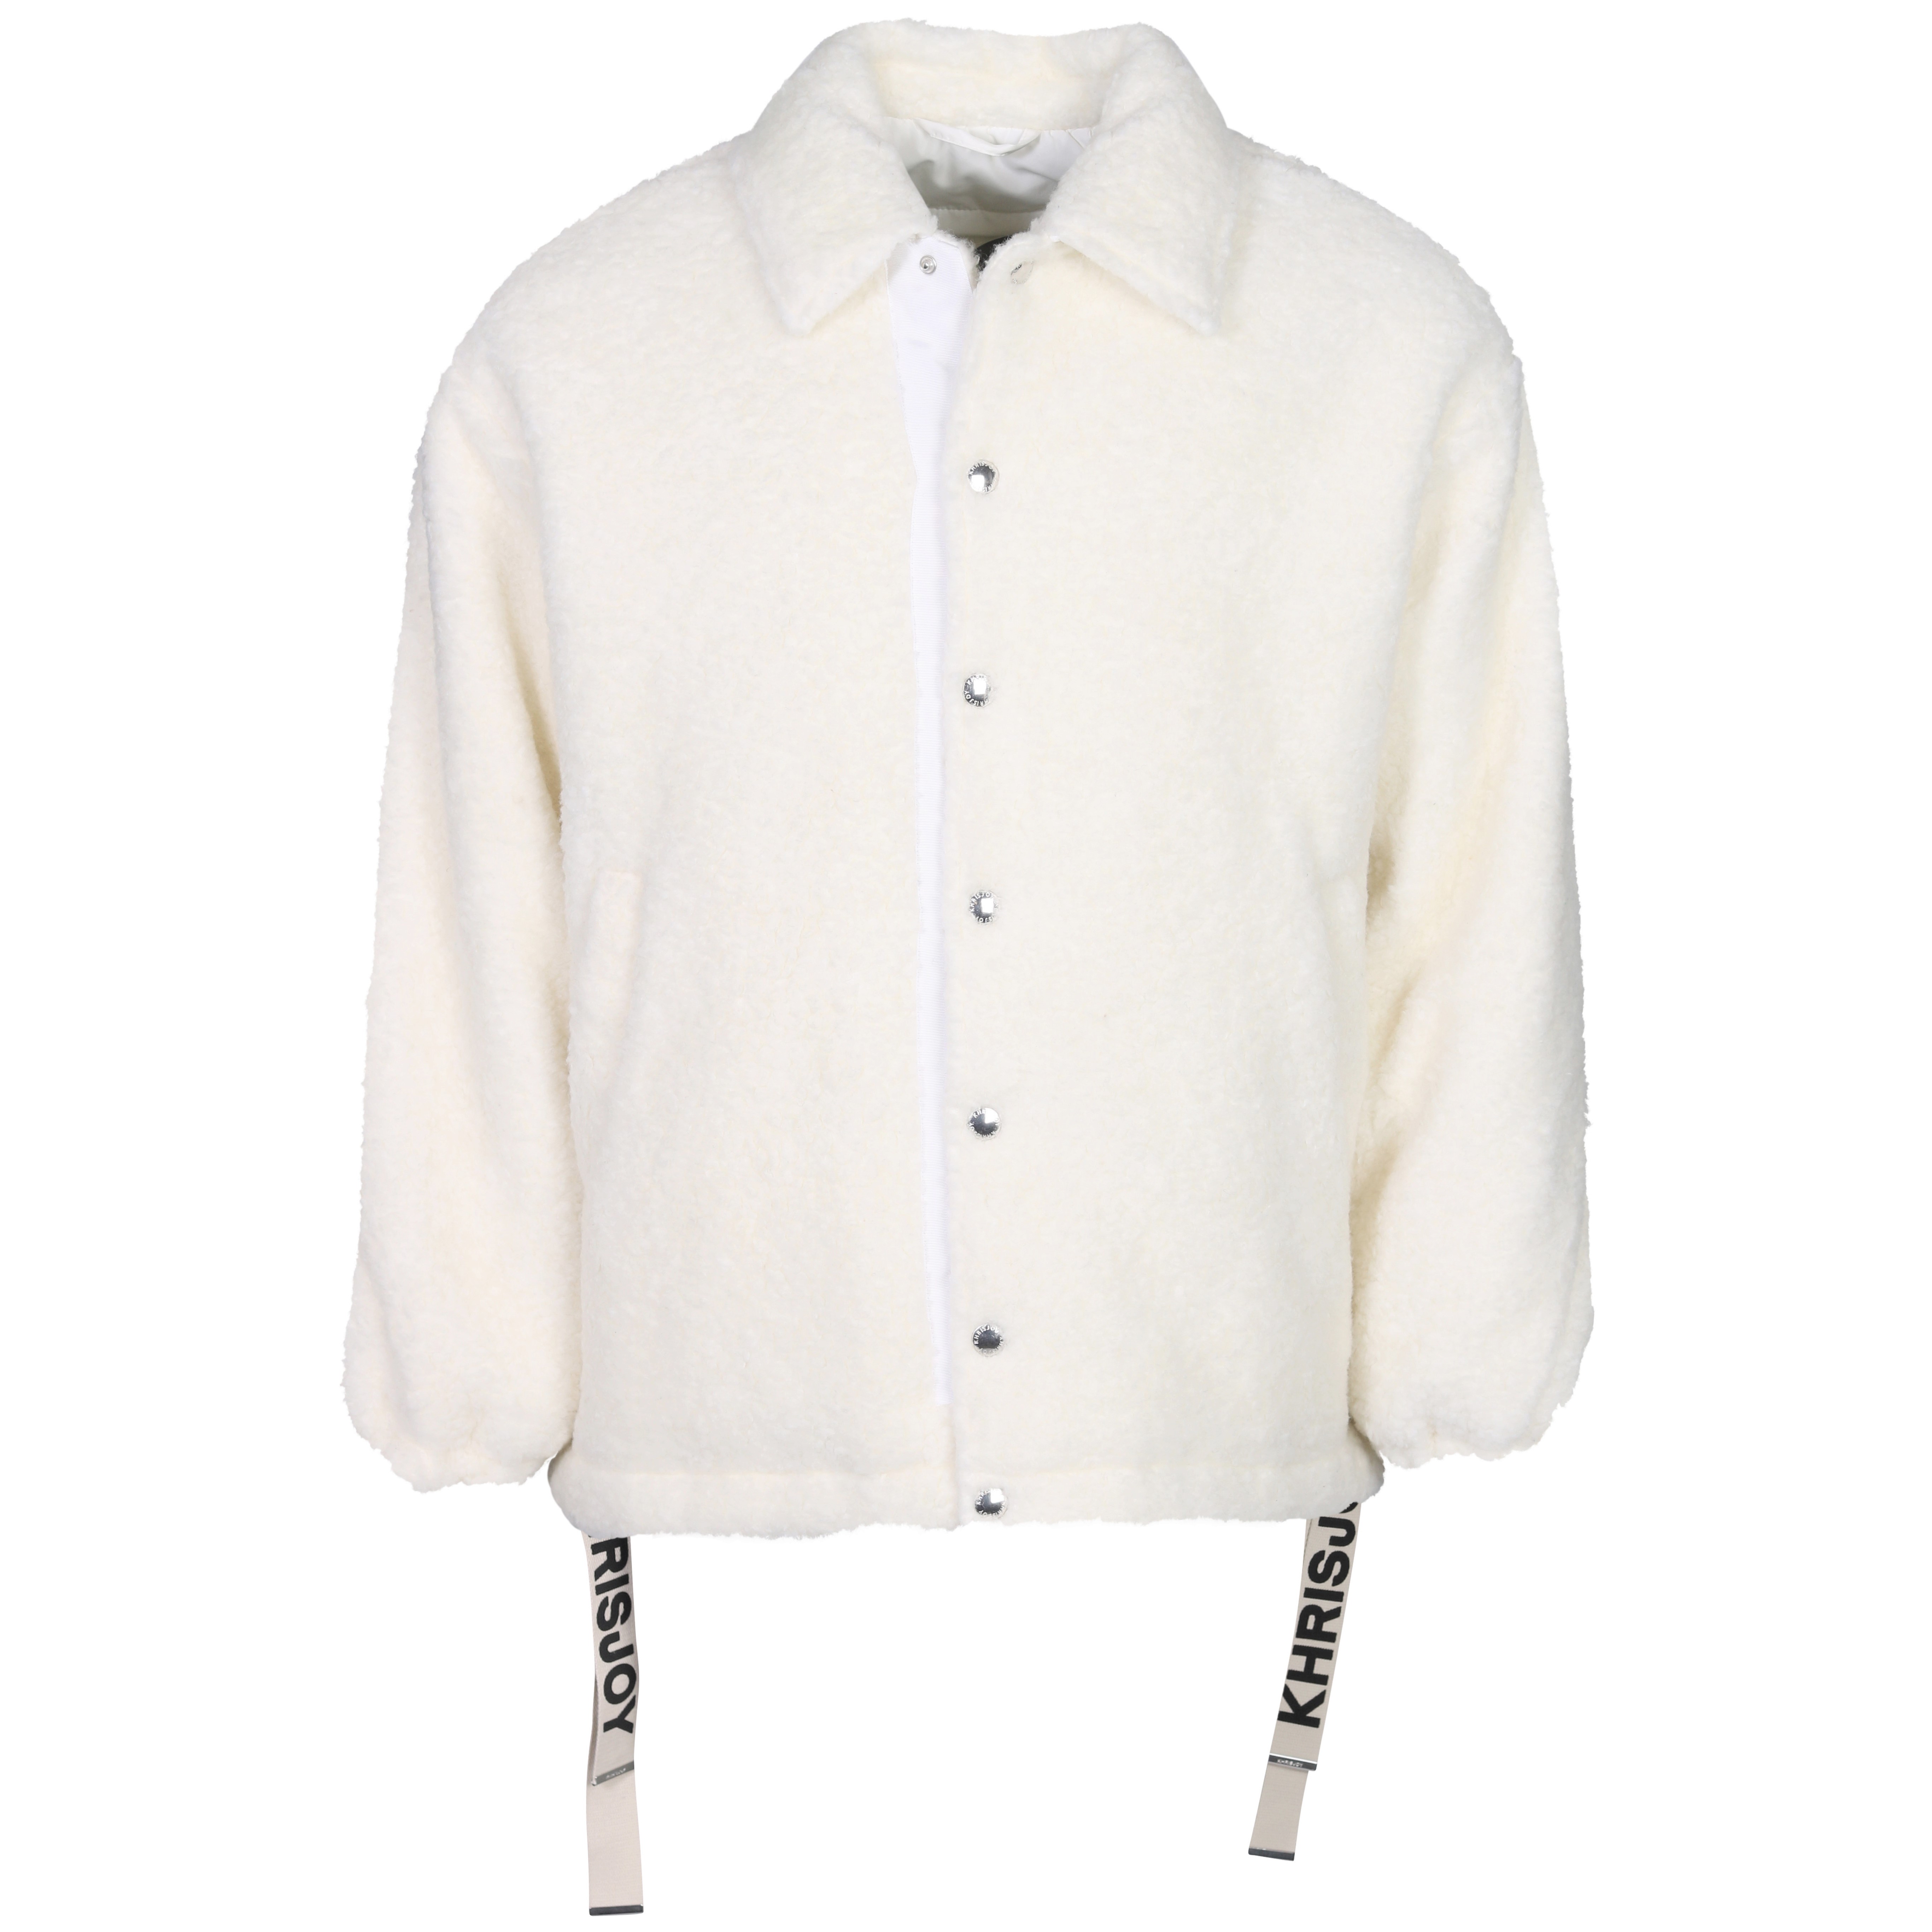 Khrisjoy Puff Coach Pile Jacket in Off White